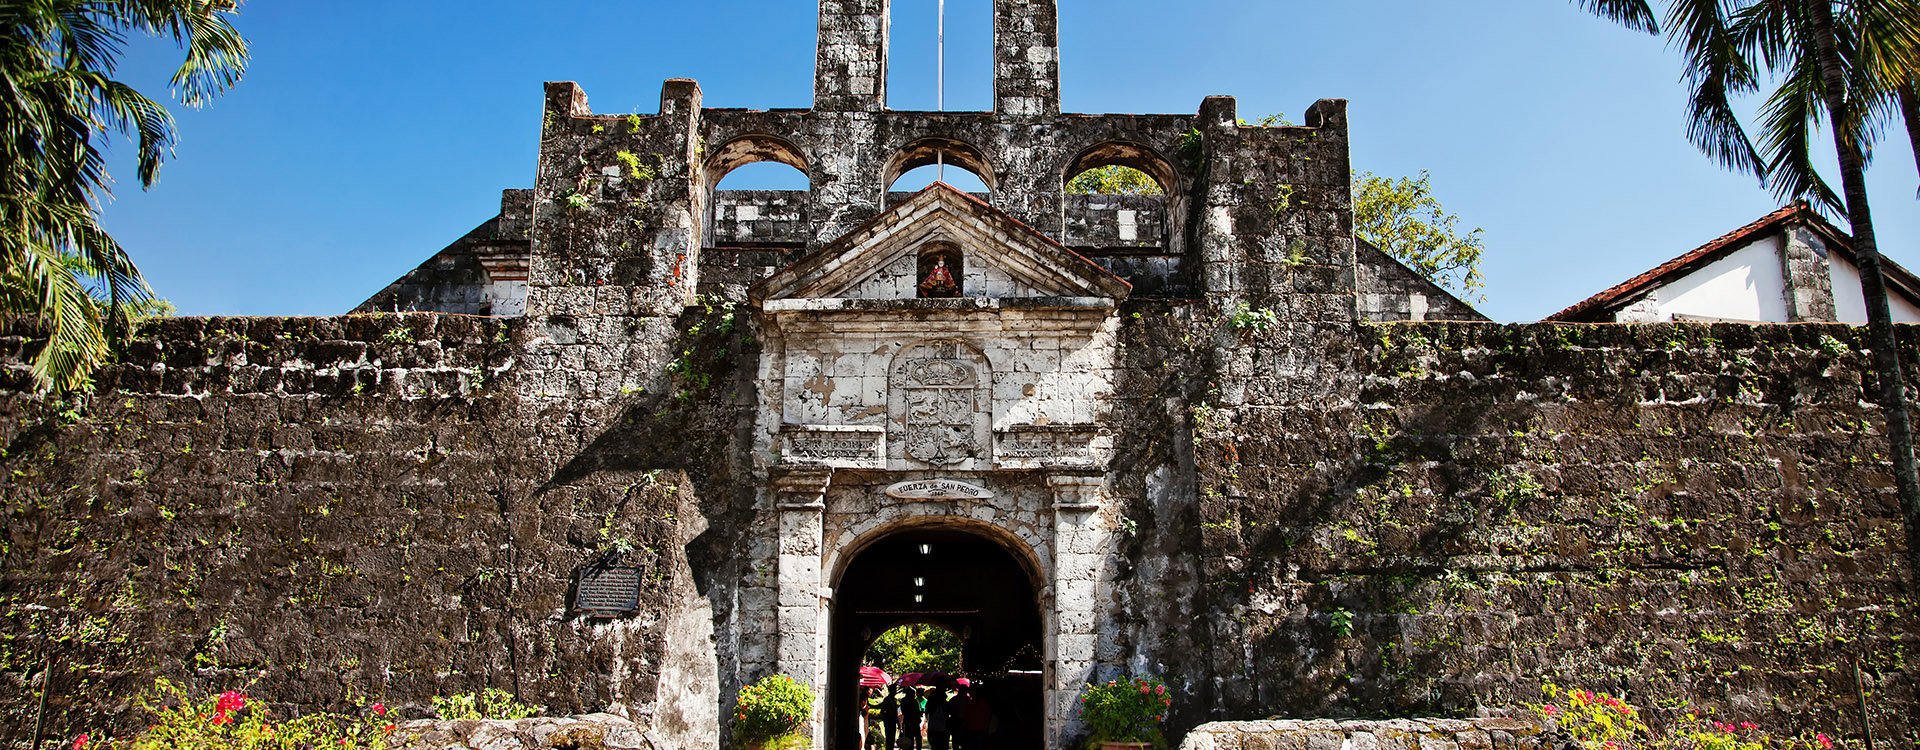 Fort San Pedro in Cebu, Philippines on a clear sunny day